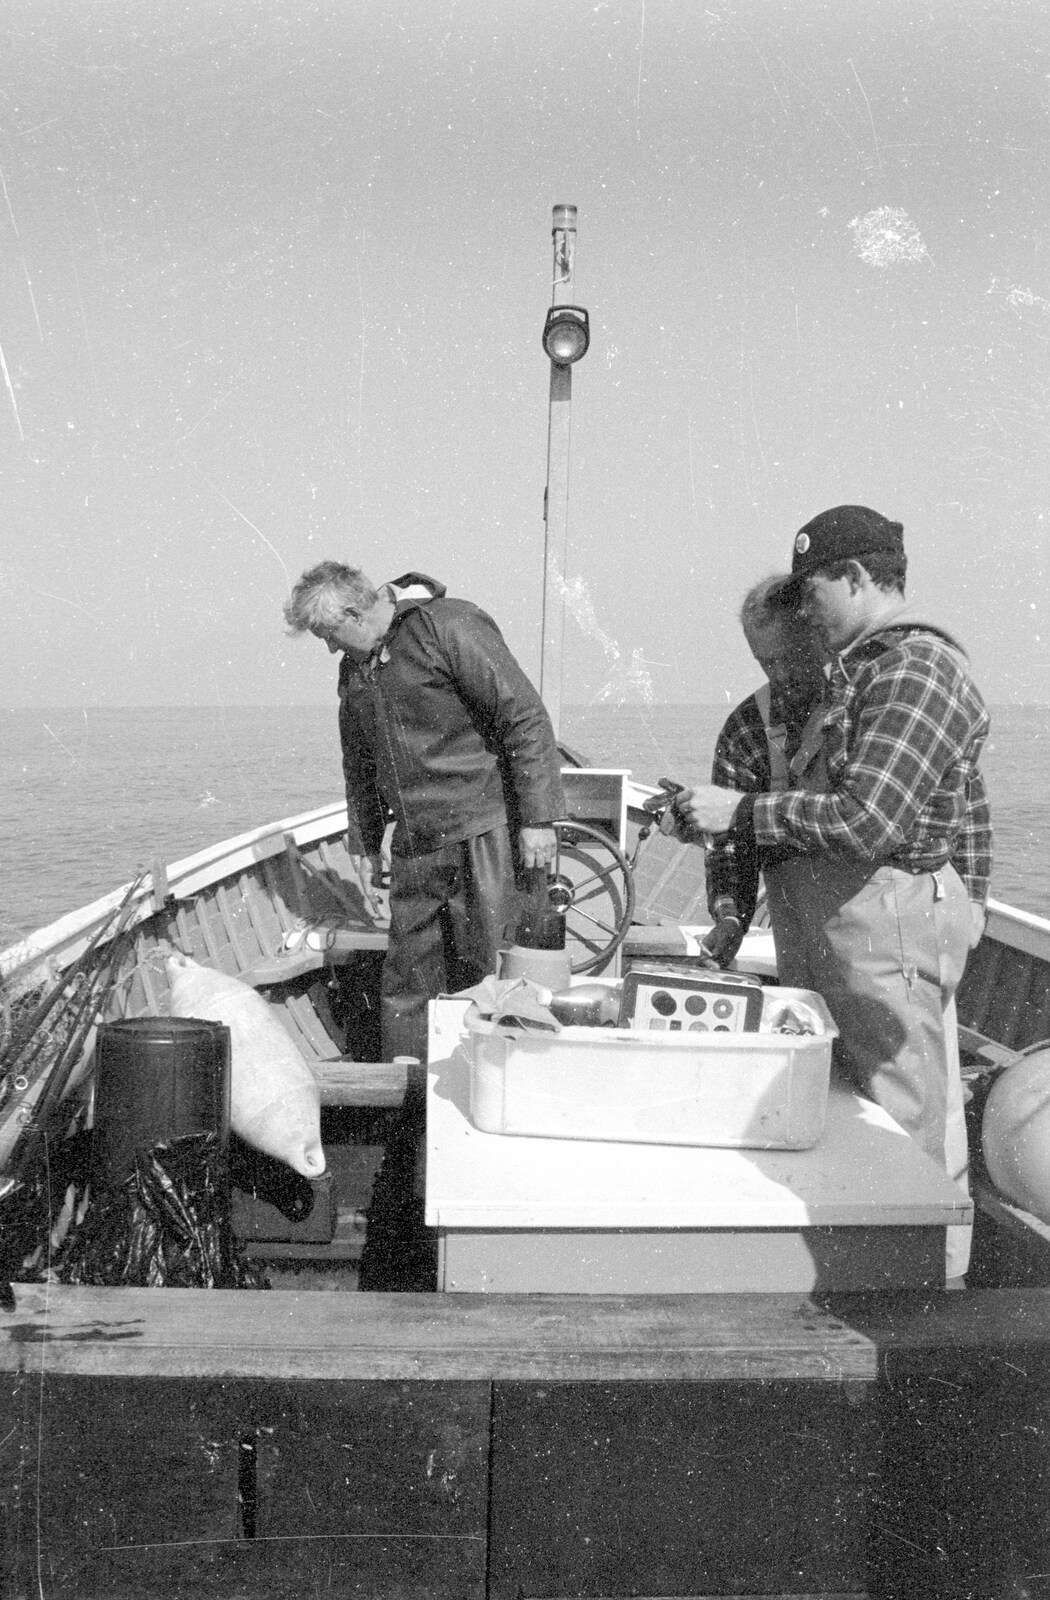 The boys on the Linda M from A Fishing Trip on the Linda M, Southwold, Suffolk - 25th April 1993